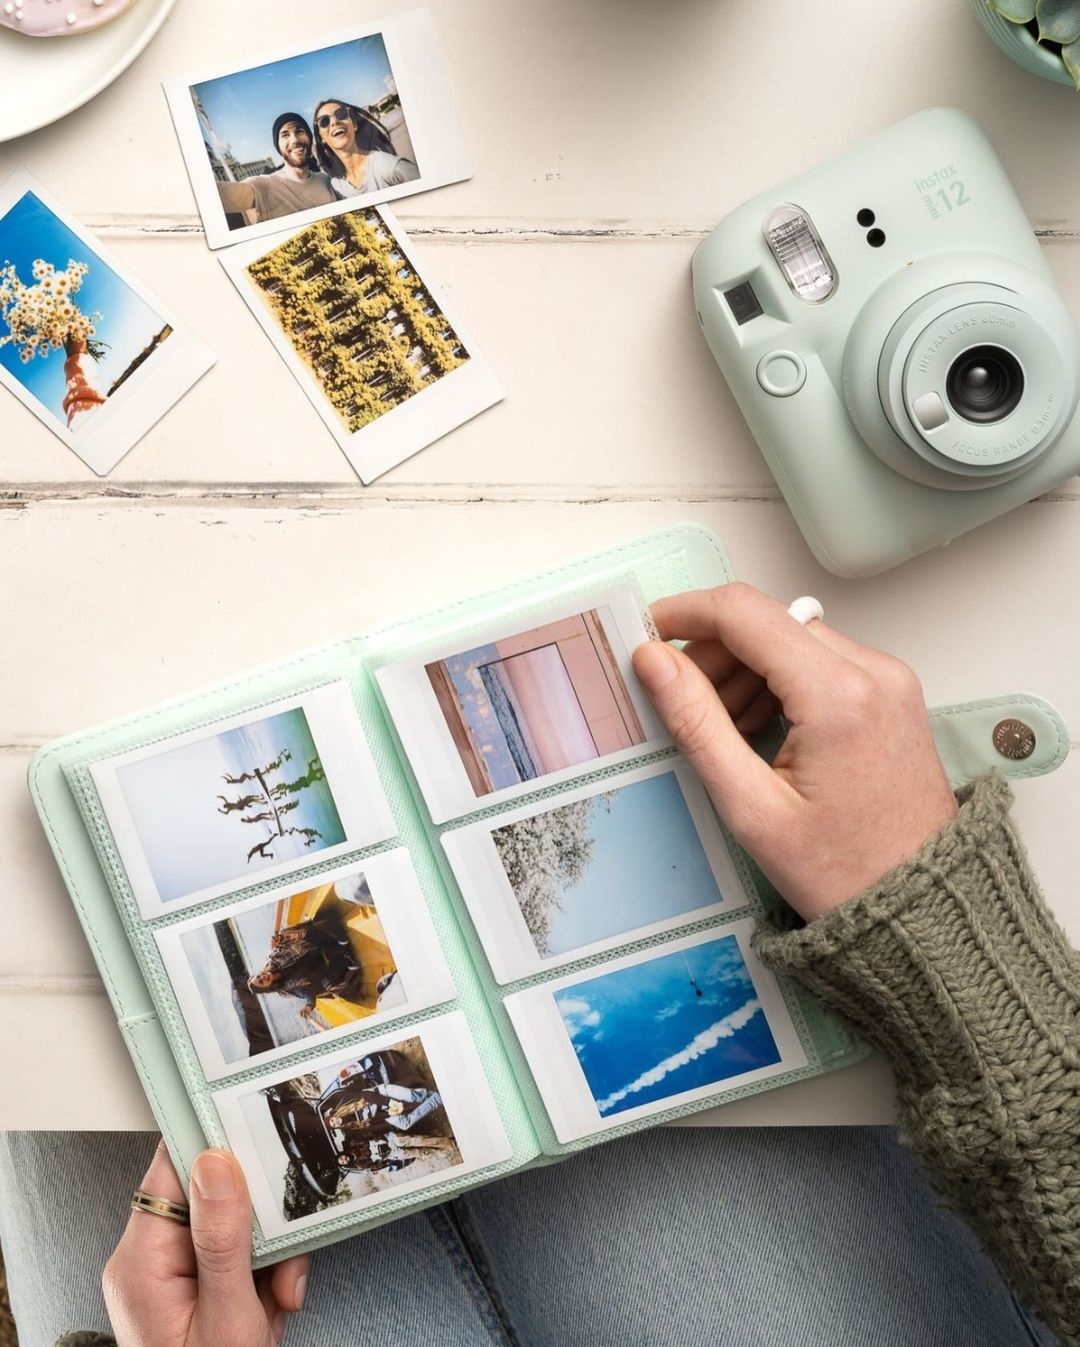 the instax camera in the color mint green displayed with a photo album